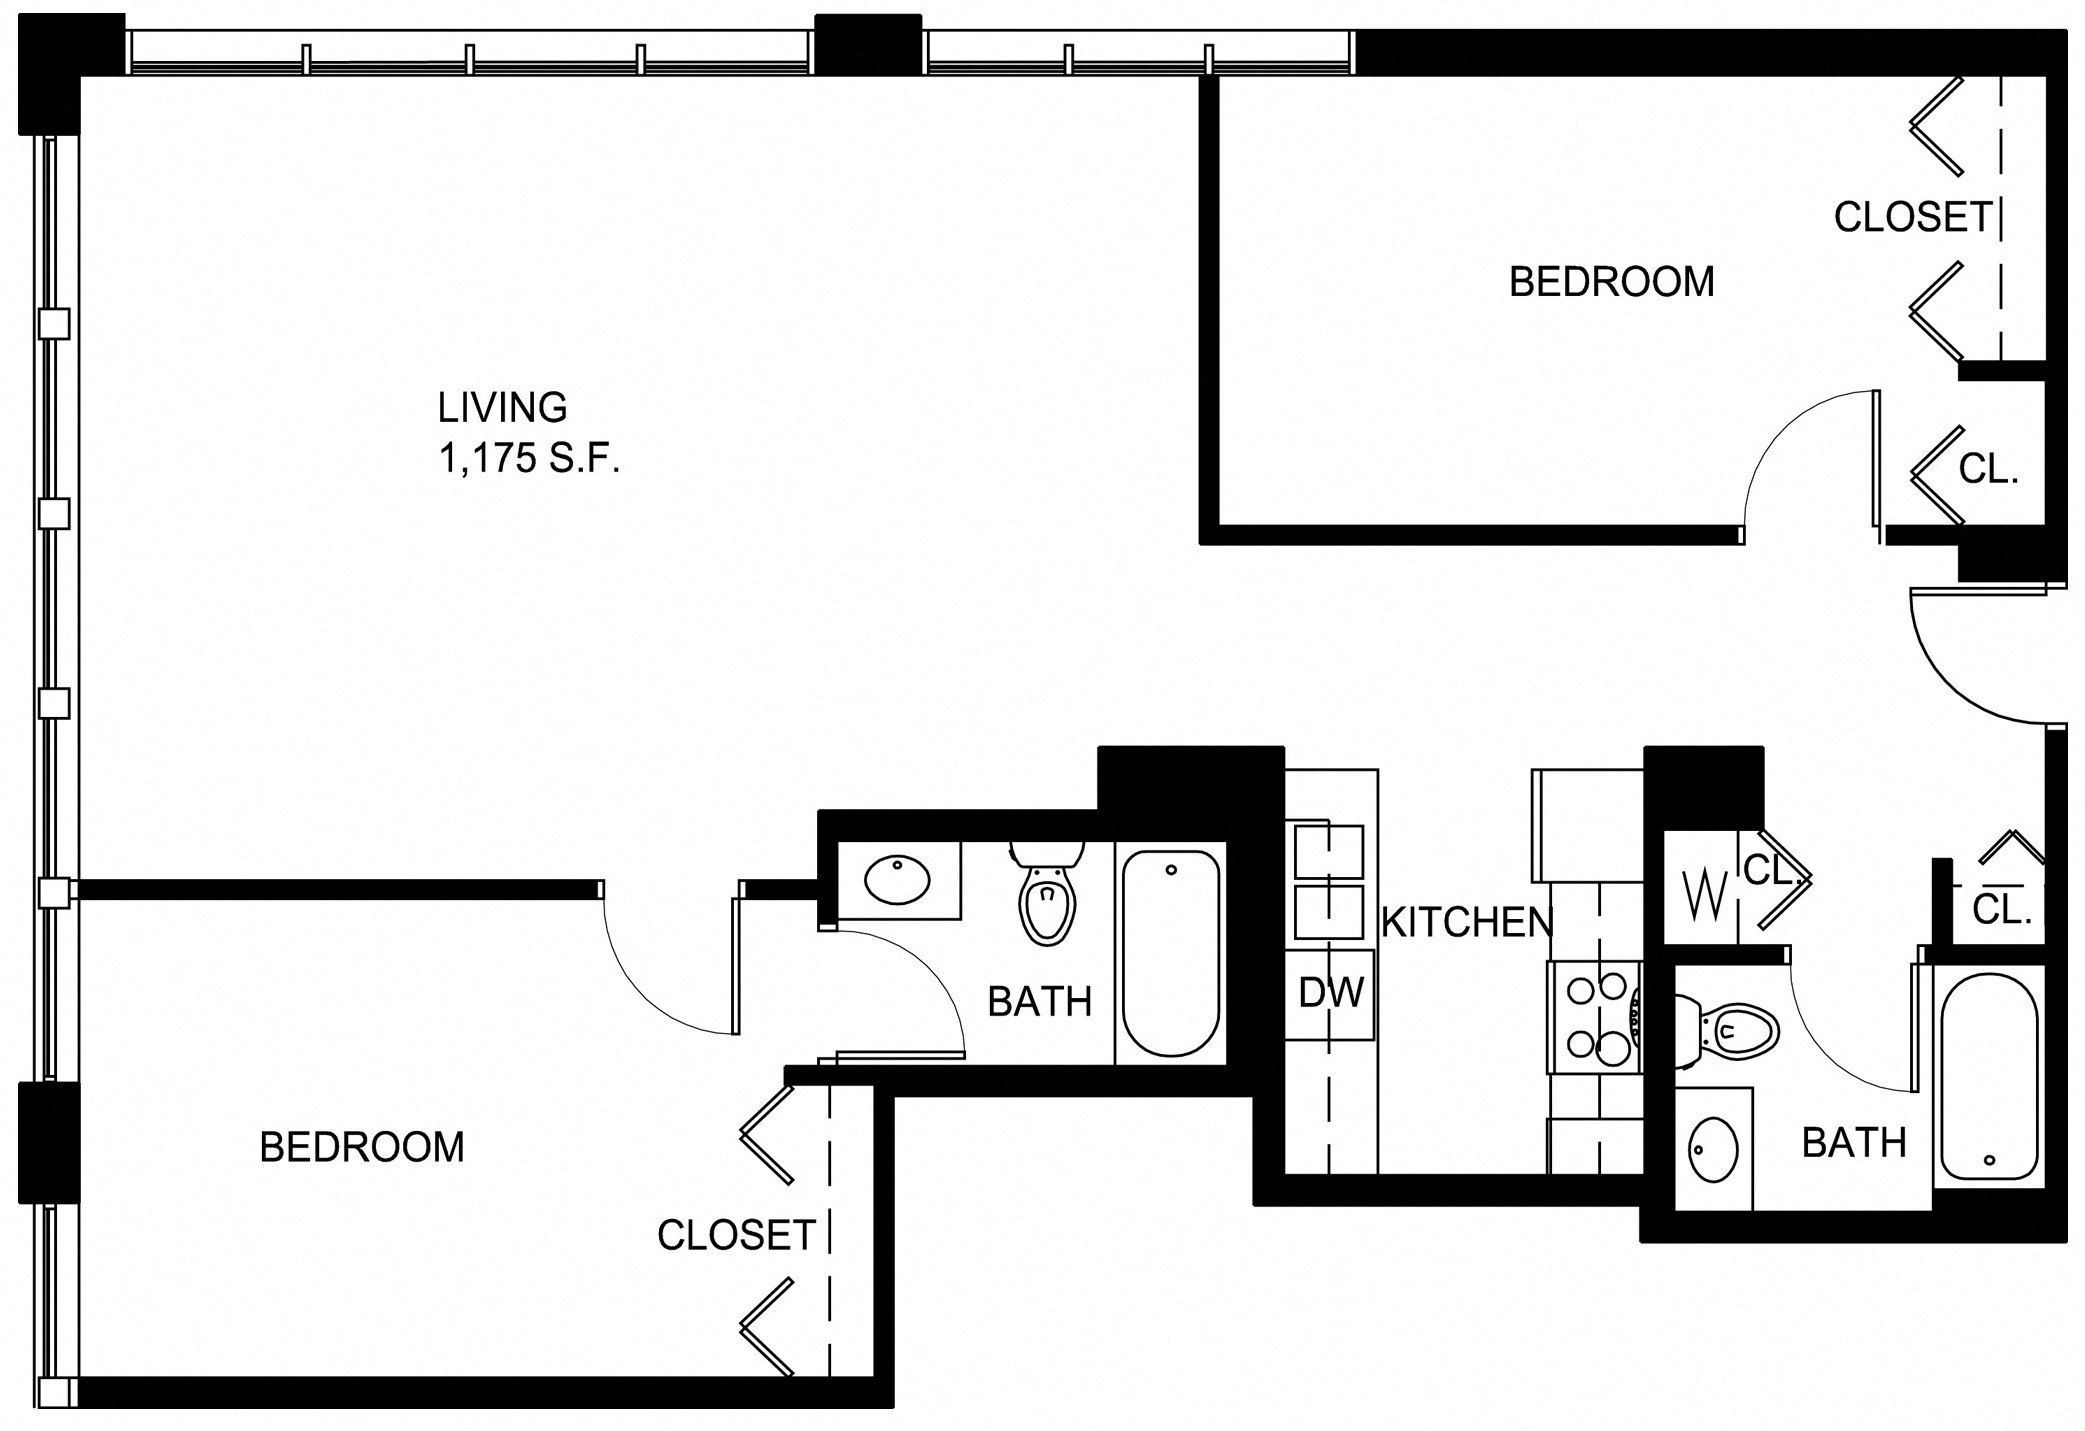 Floorplan for Apartment #P003, 2 bedroom unit at Halstead Providence